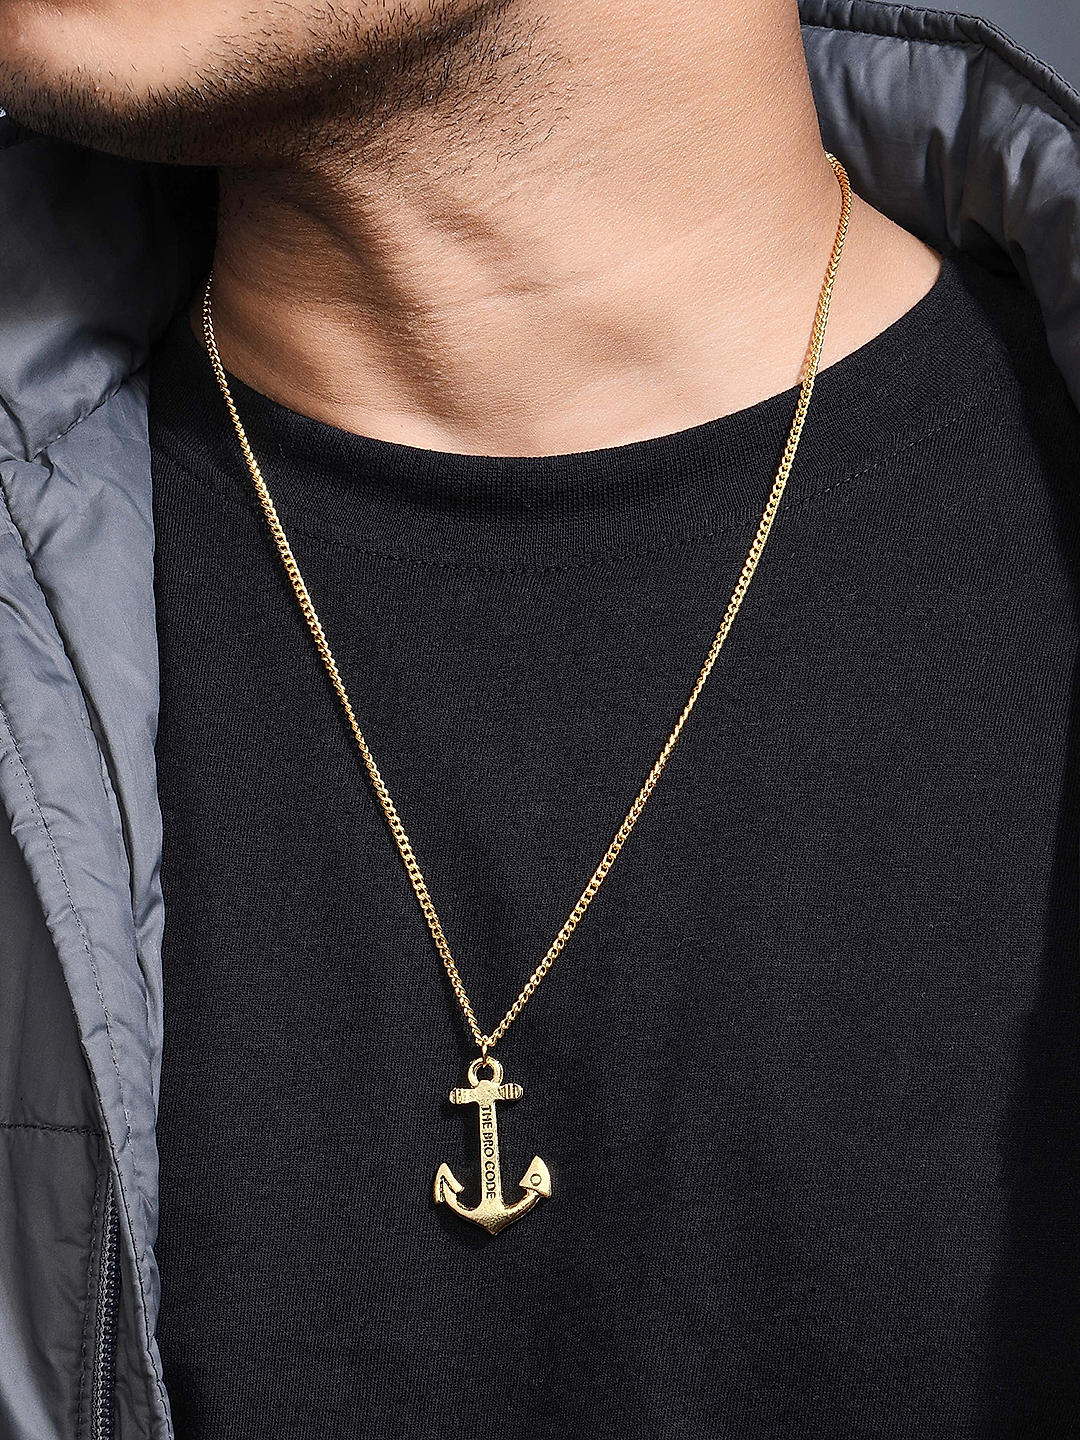 My Anchor Necklace | Bryan Anthonys